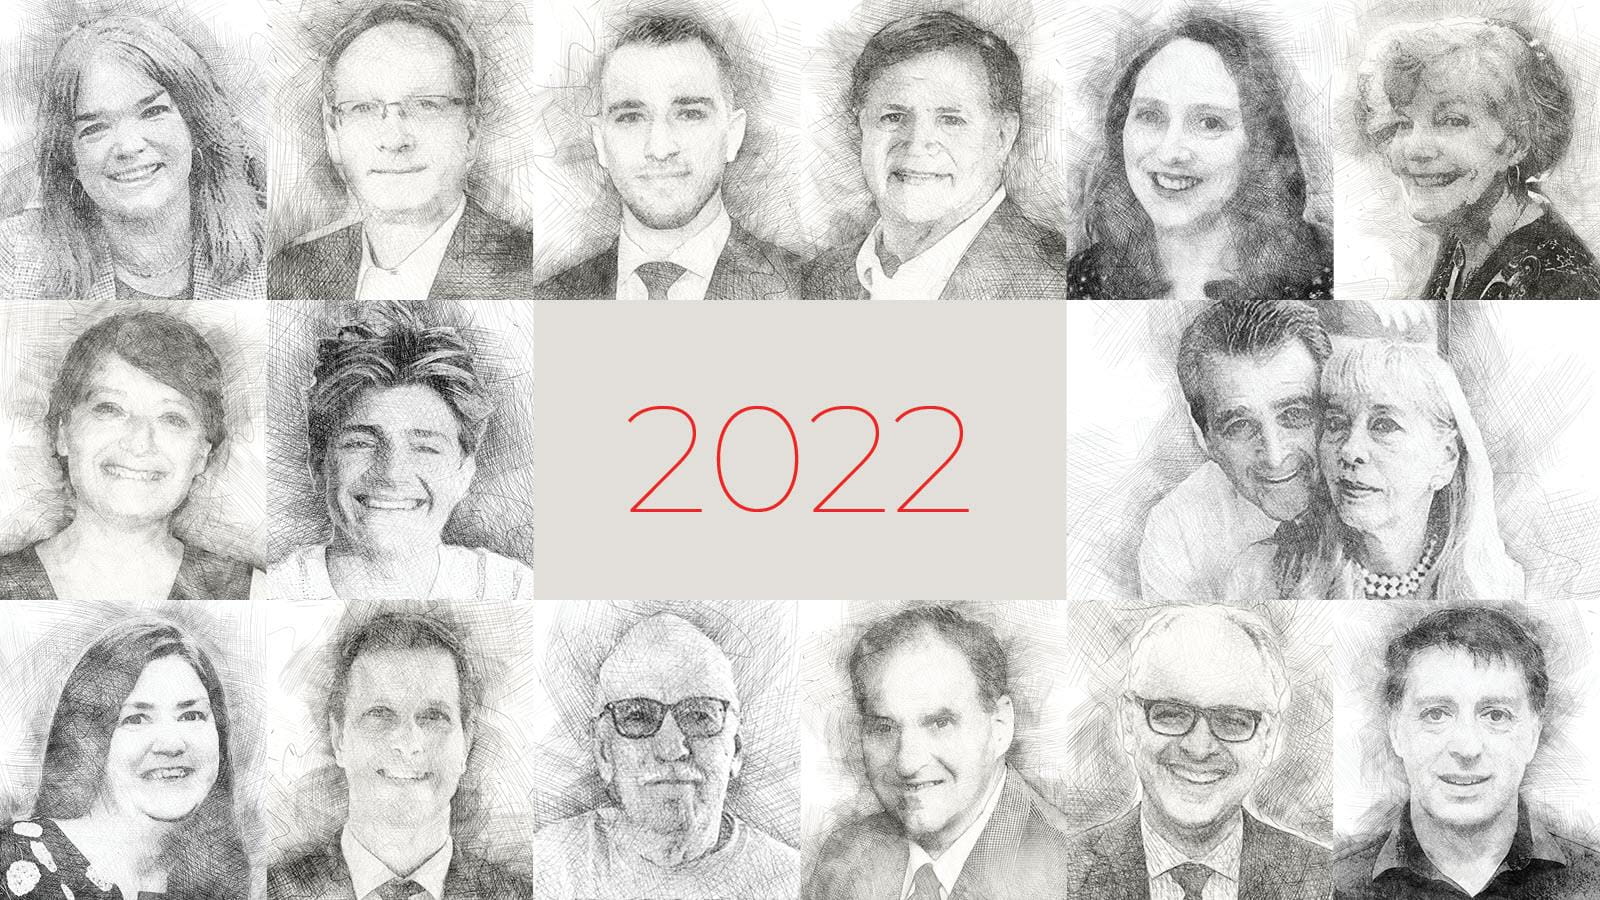 Collage of black and white sketches of leaders in the rare disease community. 2022 in the center.